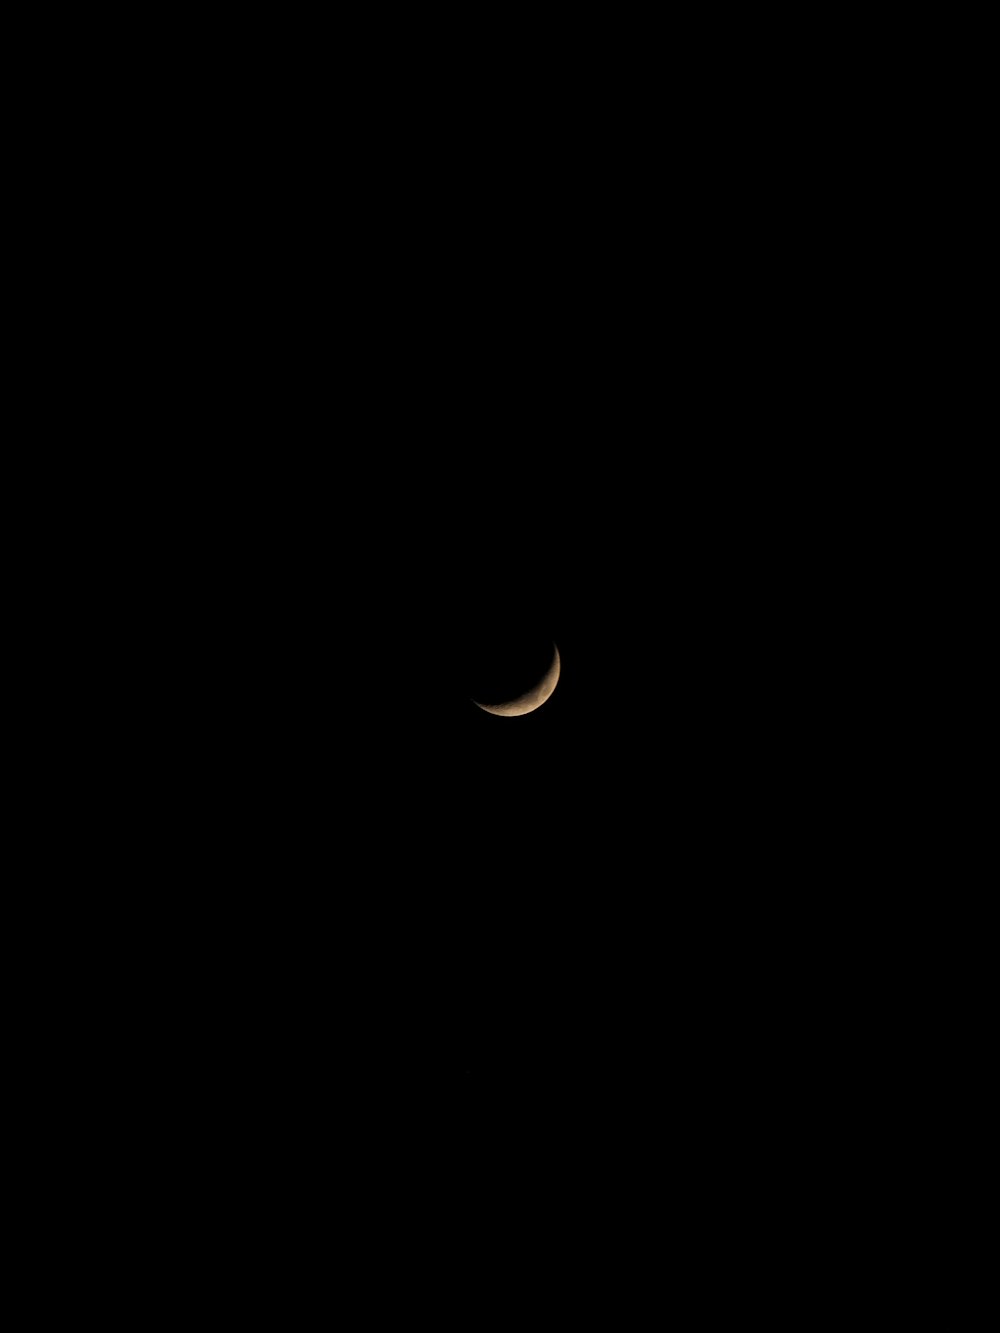 white crescent moon in black background